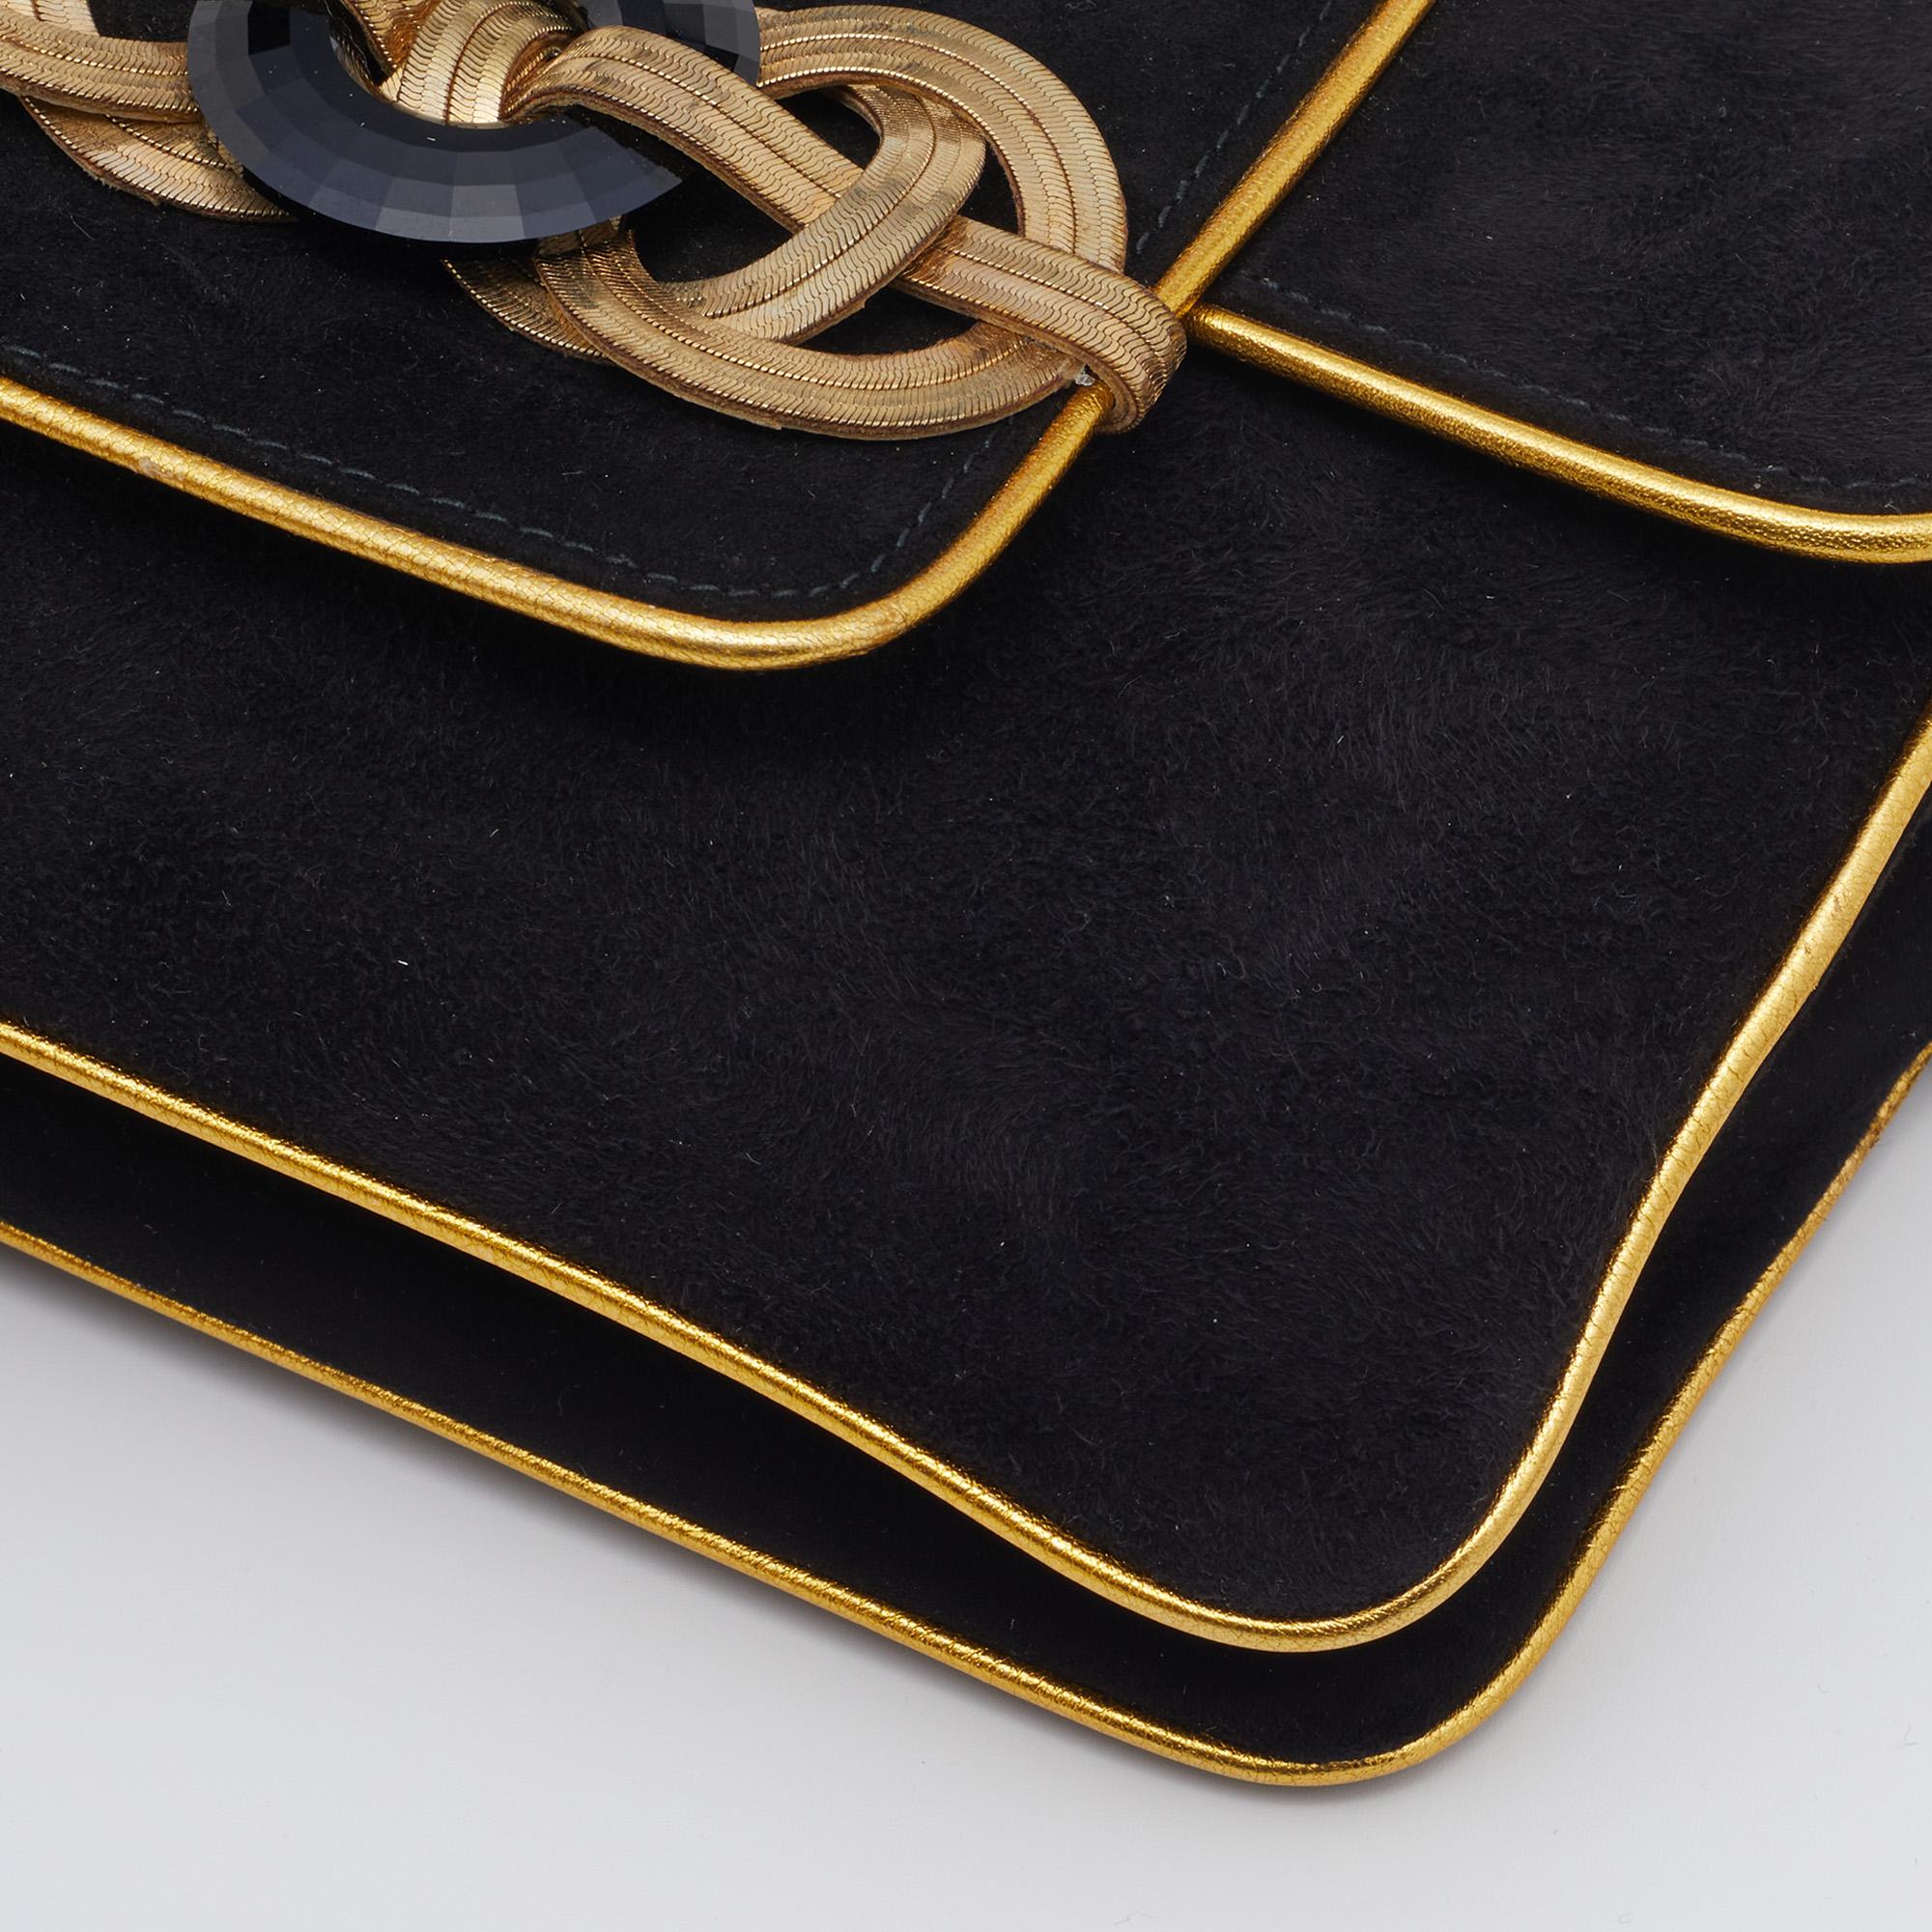 Dazzle the eyes that fall on you when you swing this stunning Ralph Lauren creation. Crafted from suede and leather in a black-gold combination, the shoulder bag is styled with a flap that has an embellished closure. It has a spacious leather